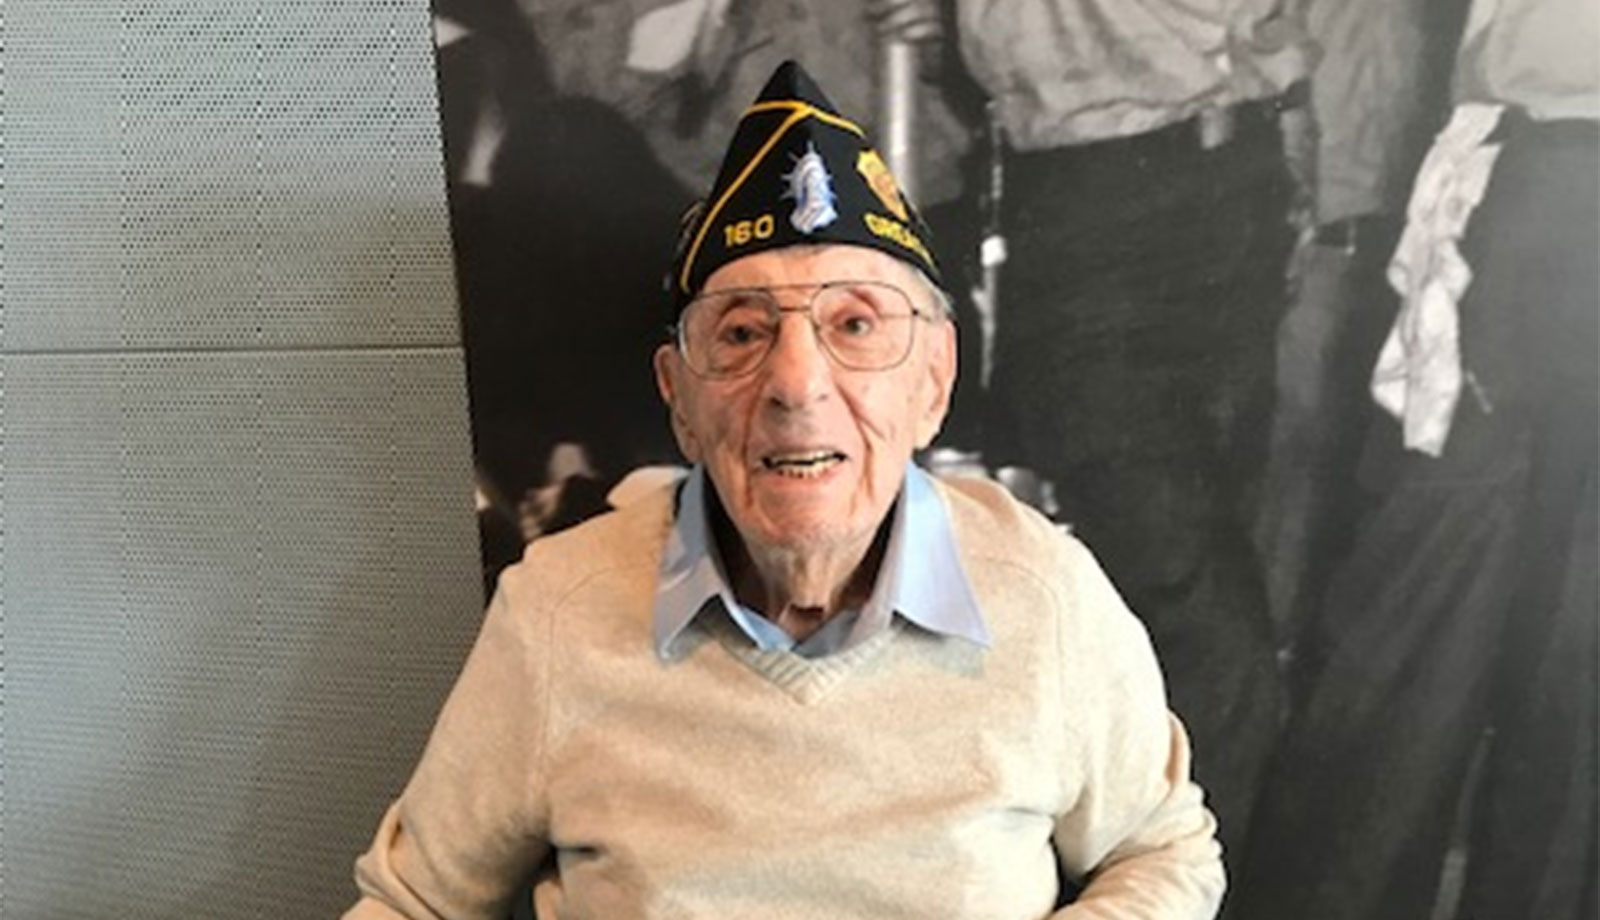 Philip Kahn received two Bronze Battle Stars for his service in WWII, his grandson said.